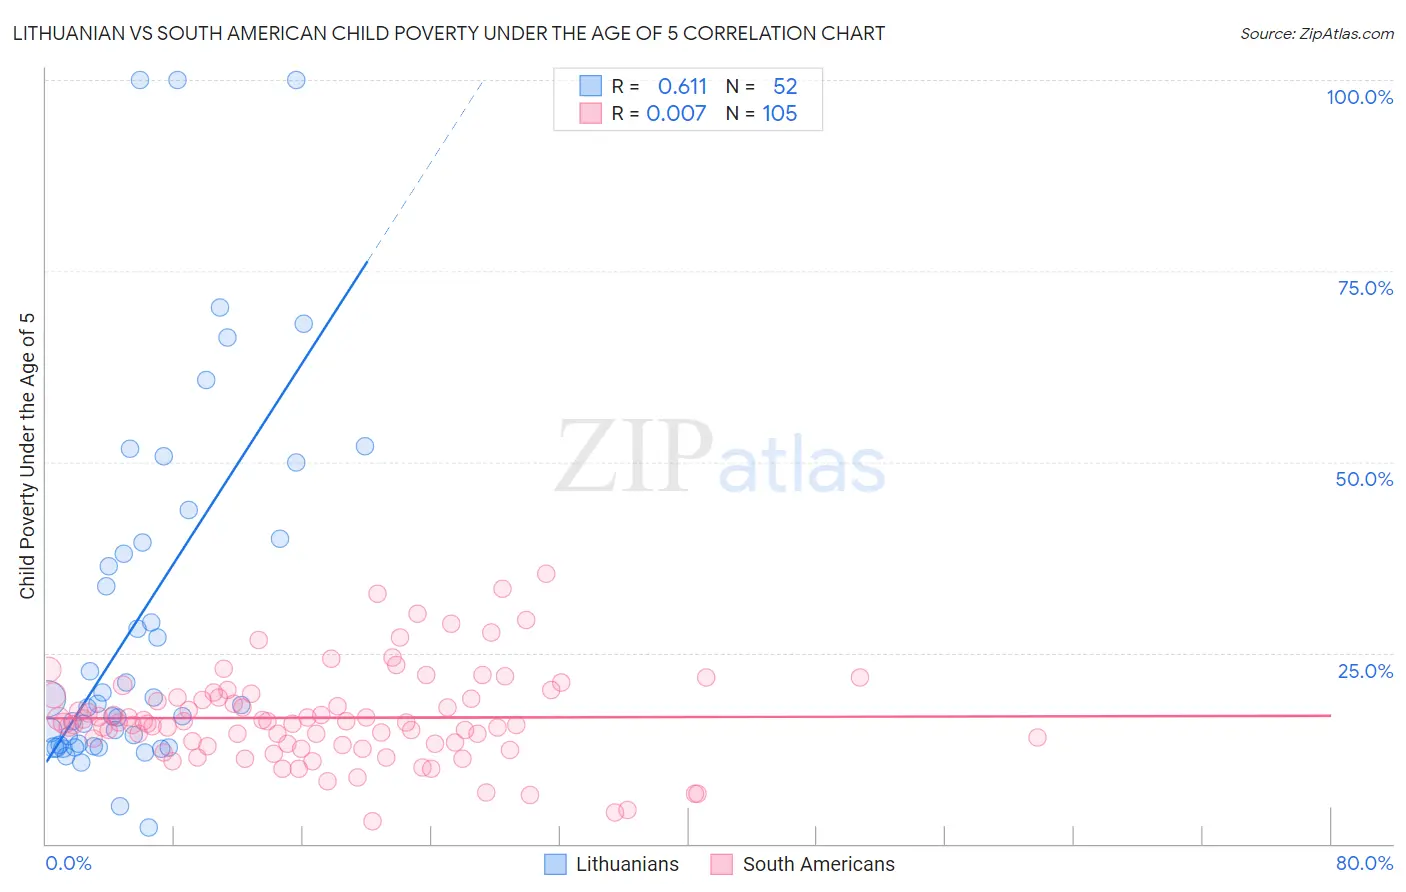 Lithuanian vs South American Child Poverty Under the Age of 5